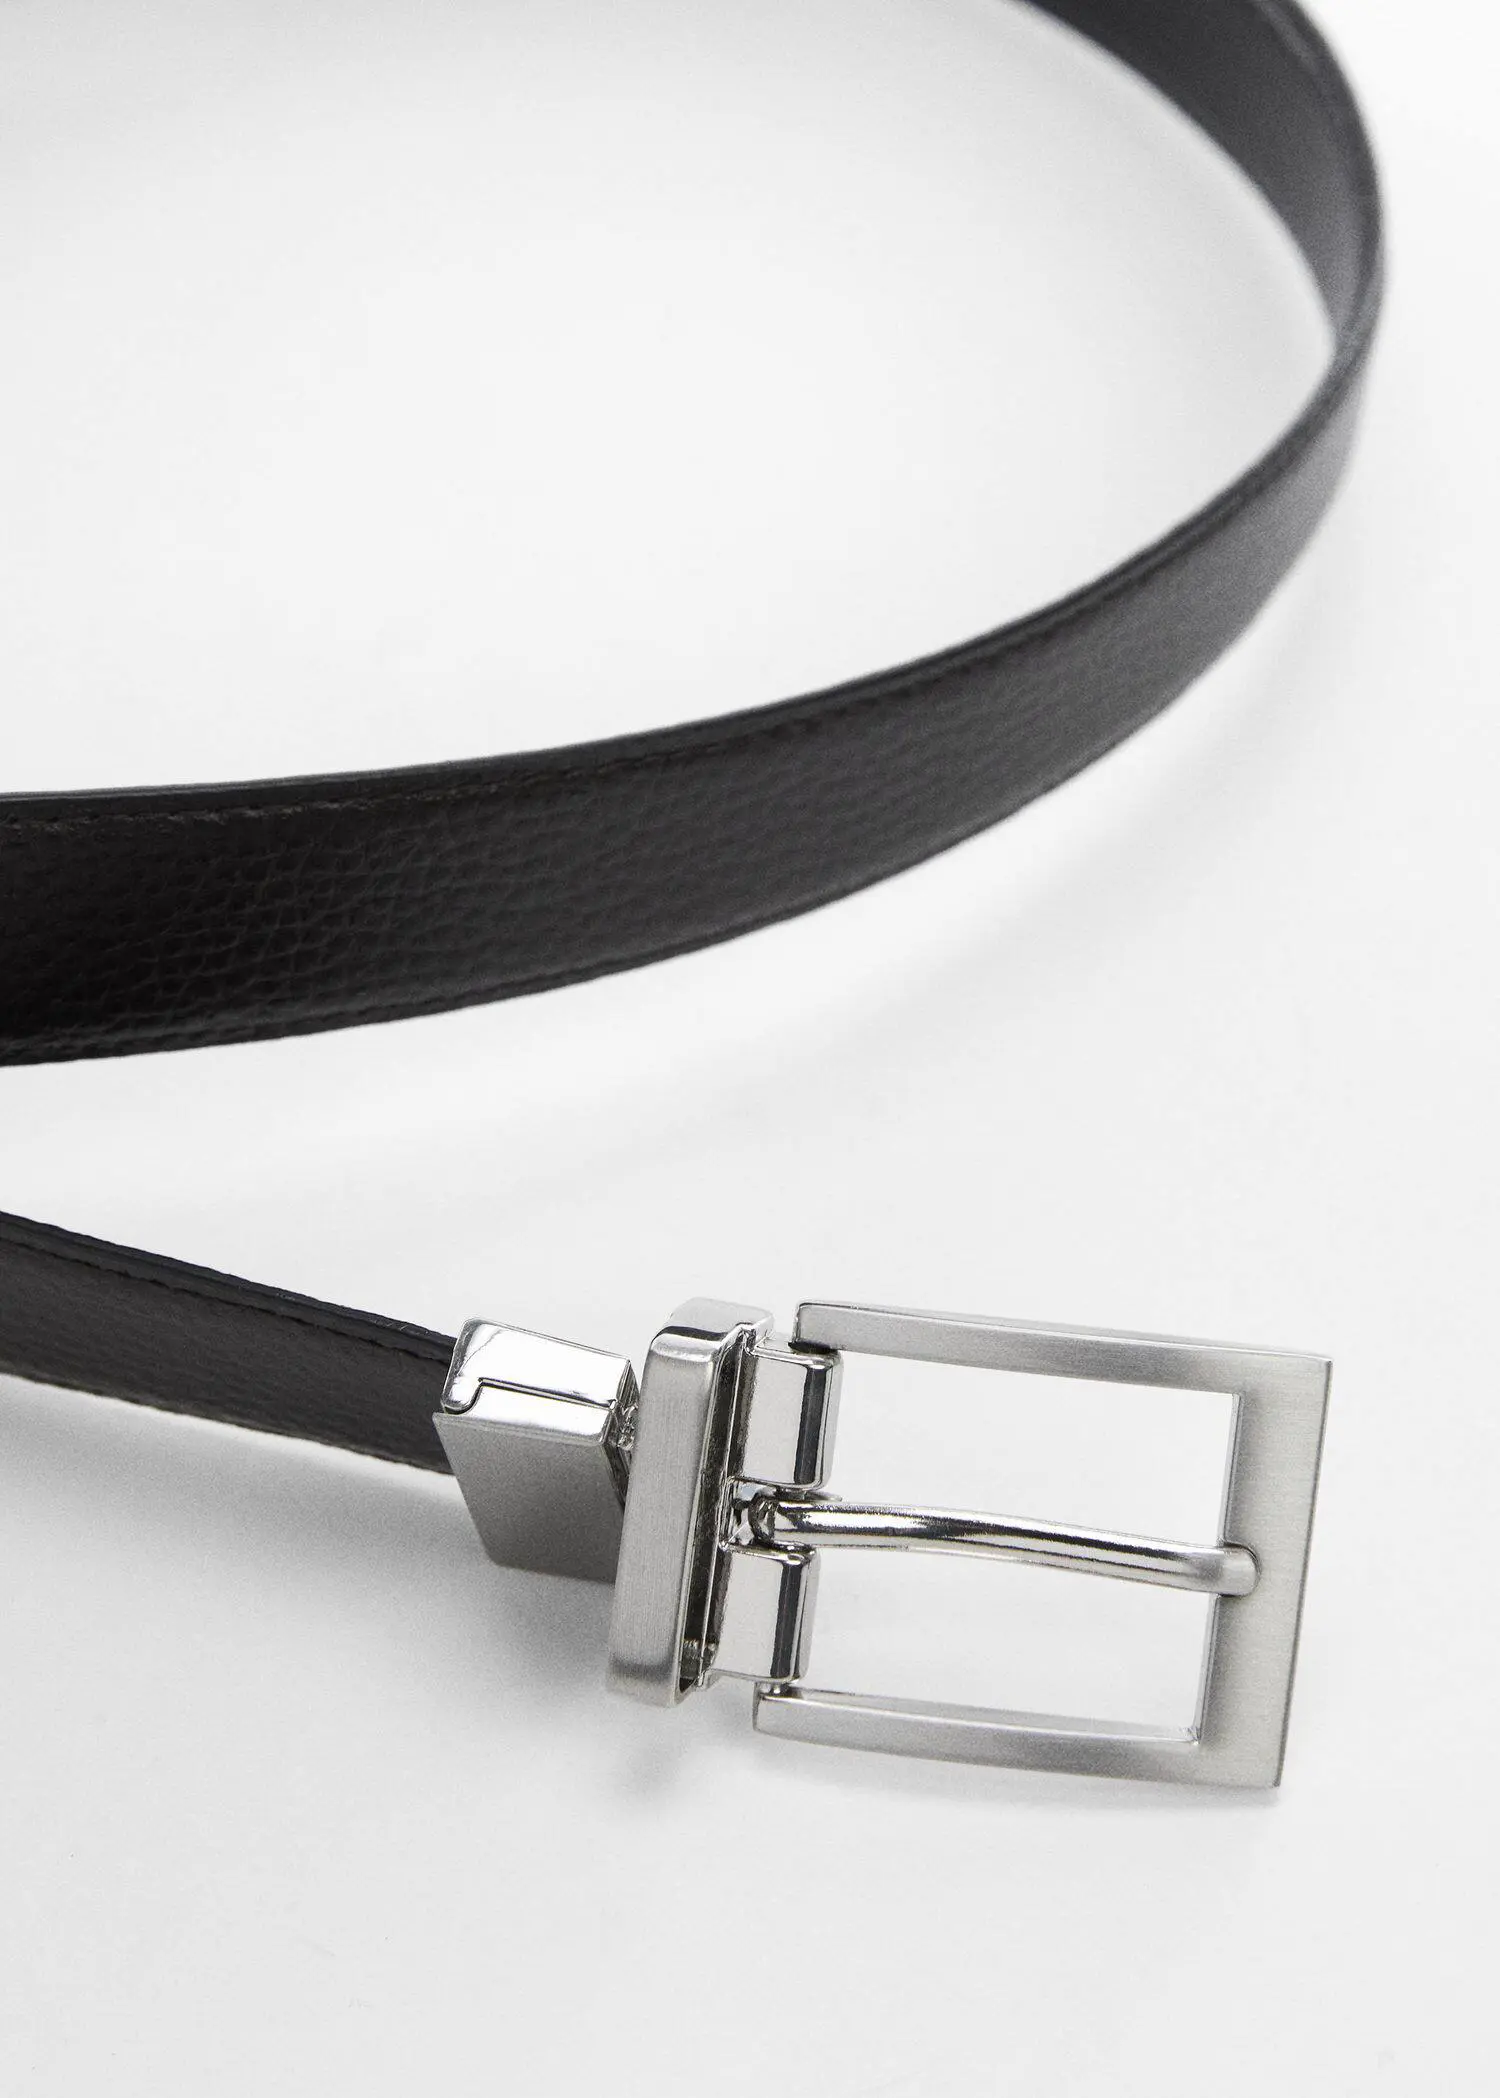 Mango Dress with leather belt. a close-up of a black belt with a silver buckle. 